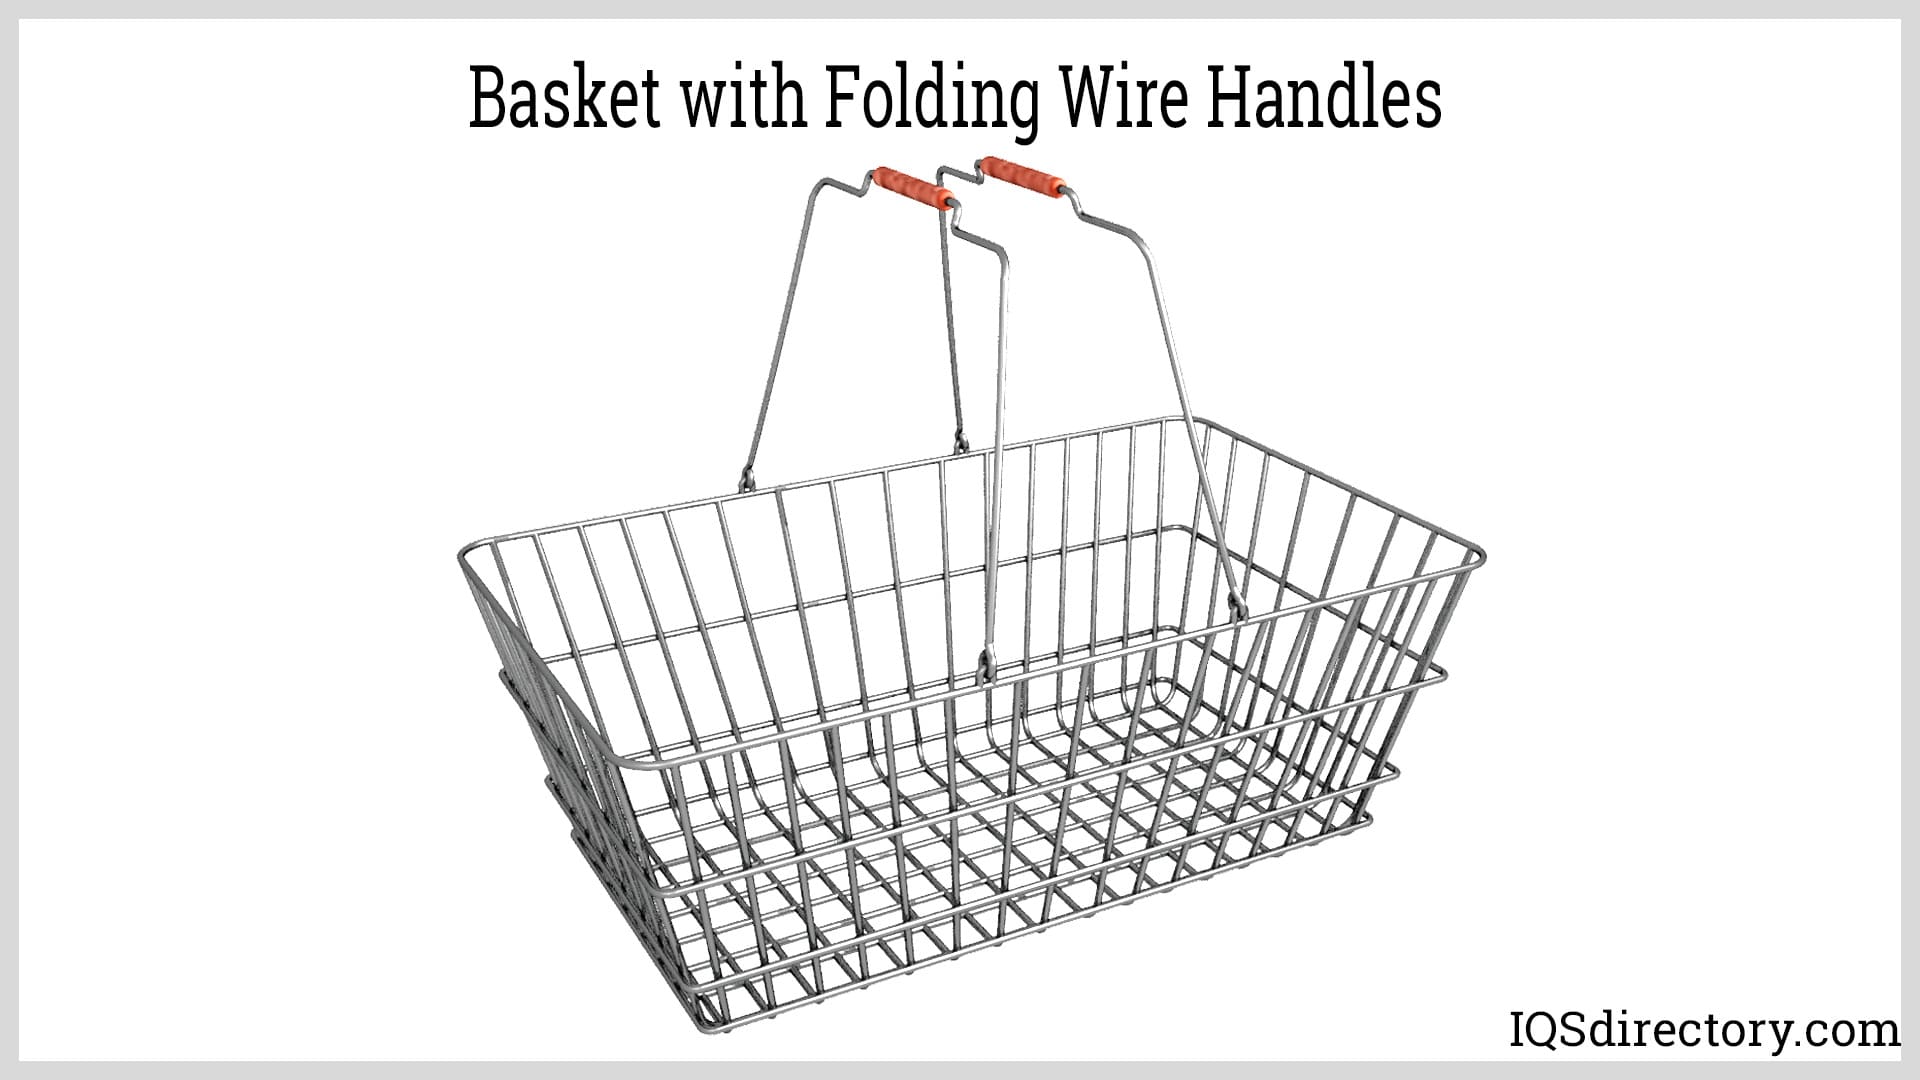 Basket with Folding Wire Handles